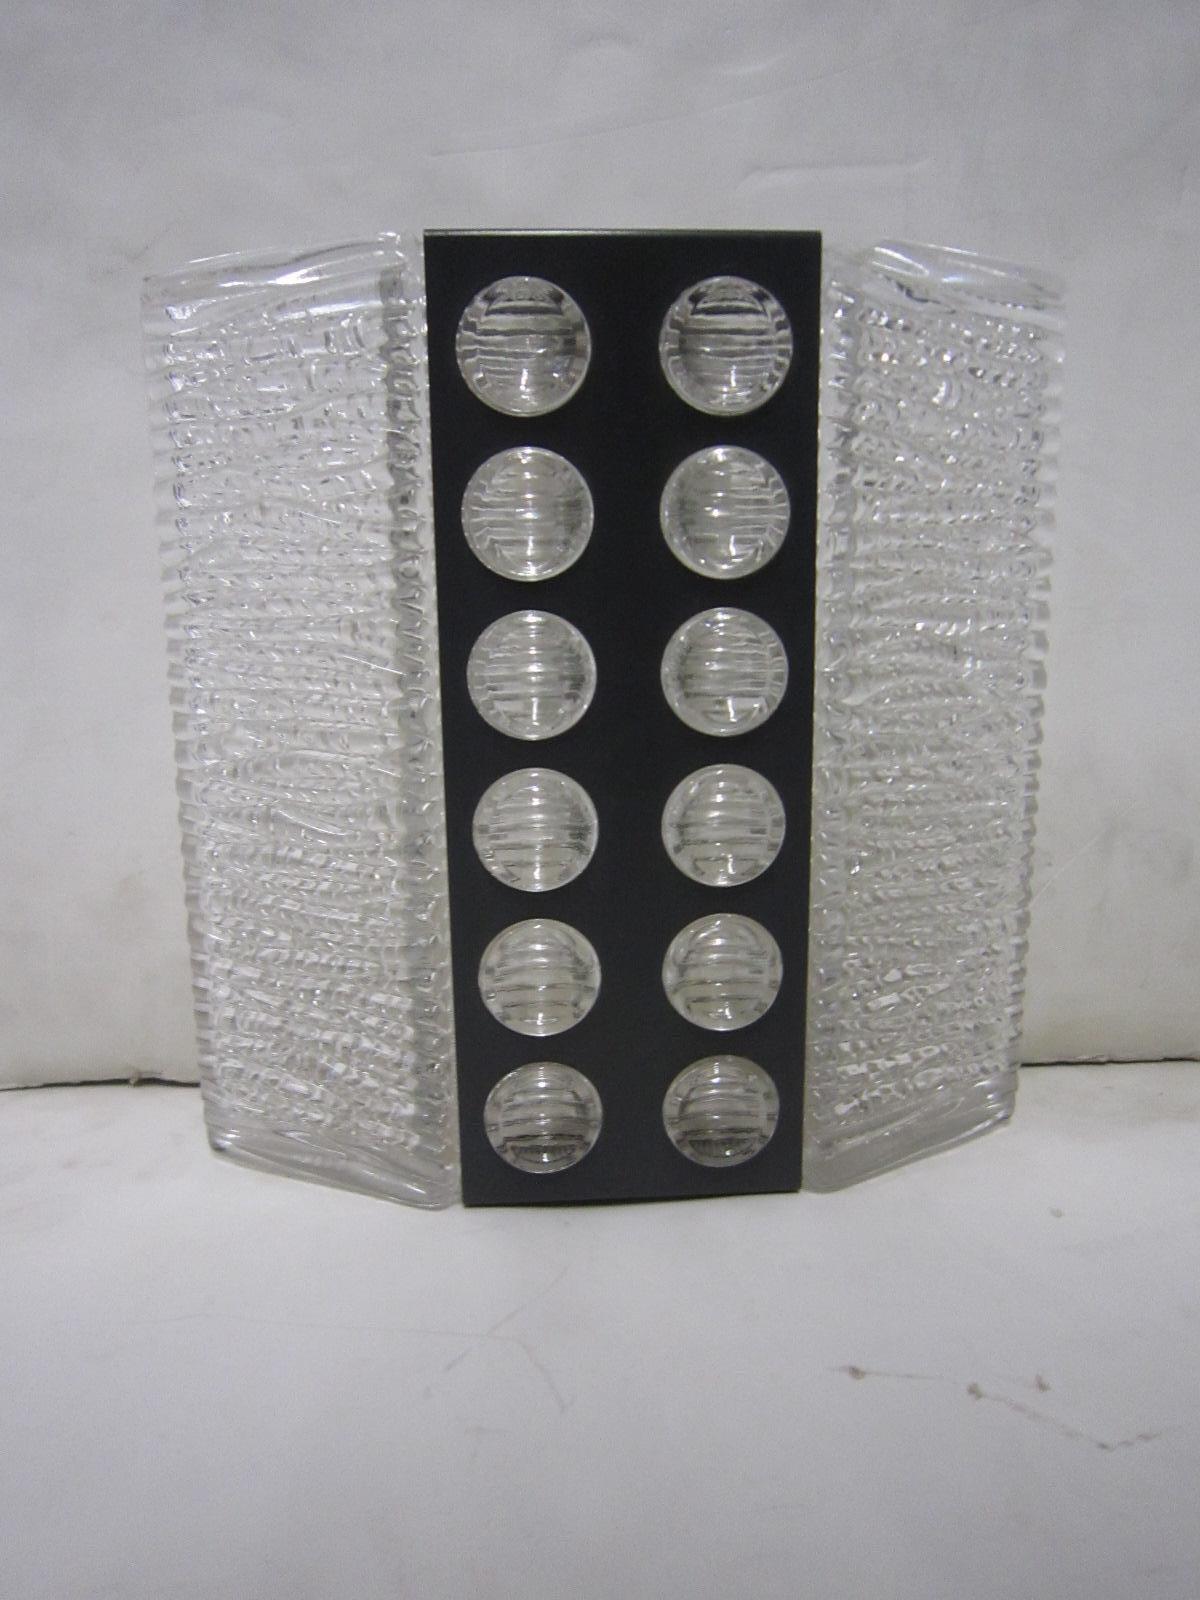 A Modernist Kaiser Leuchten wall sconce, textured glass with blackened metal overlay in circular pattern.
Wired for U.S. specs.
This wall light can be used in any room setting, ie: bath, entry, foyer, bedroom, den, office, child's room,  and with